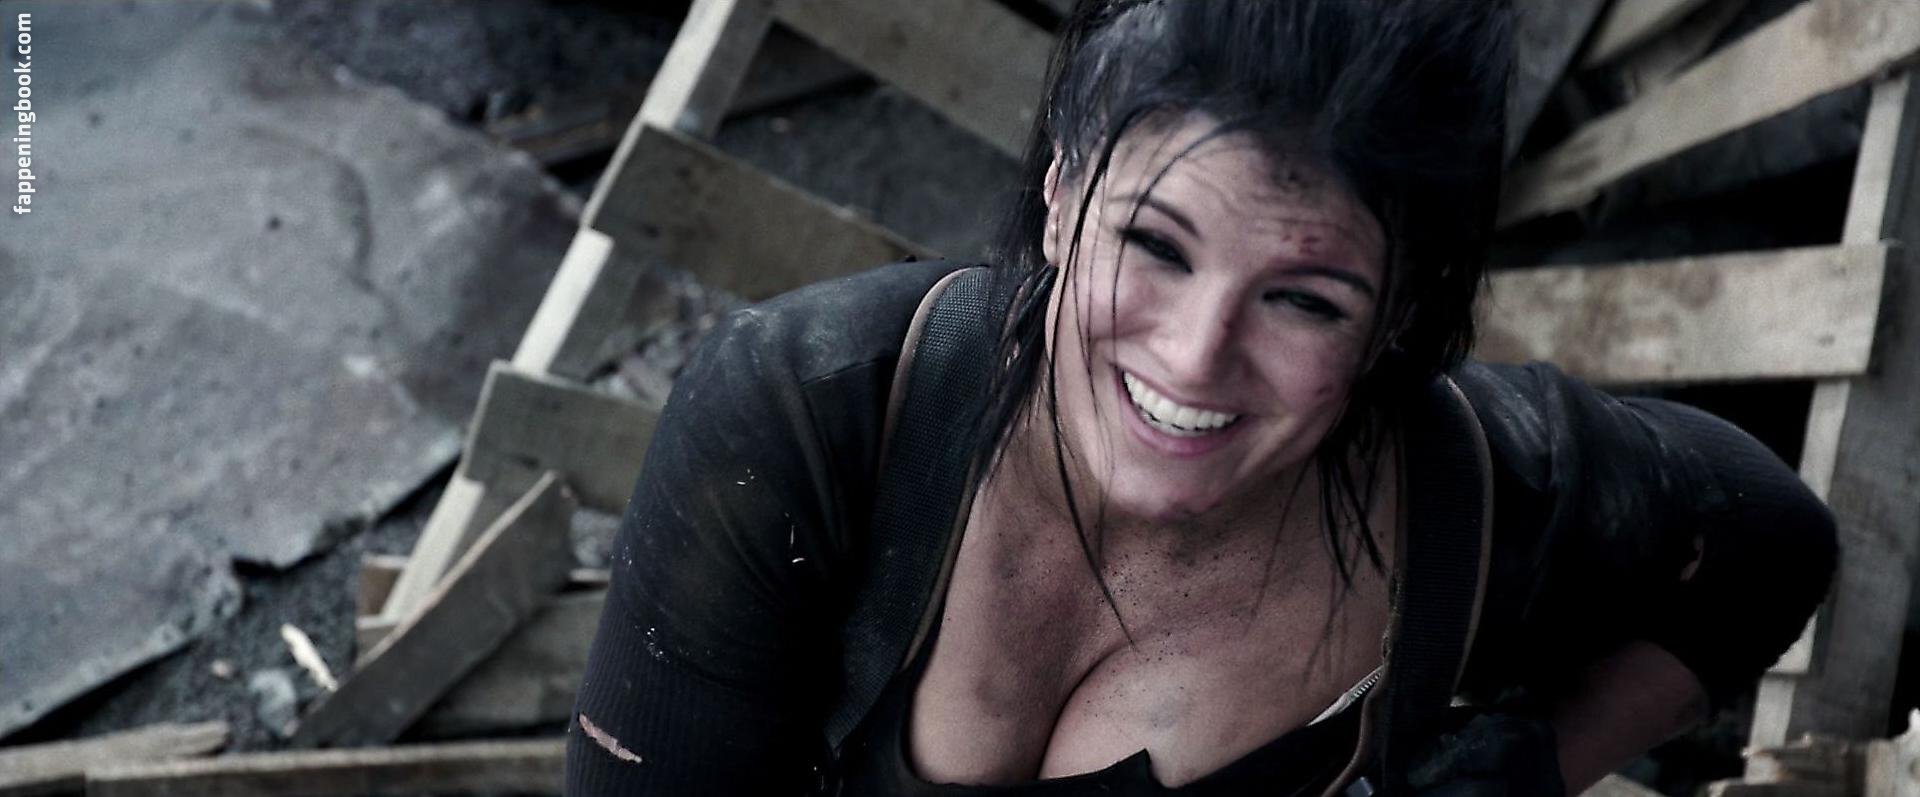 Gina Carano Nude, The Fappening - Photo #200800 - FappeningBook.